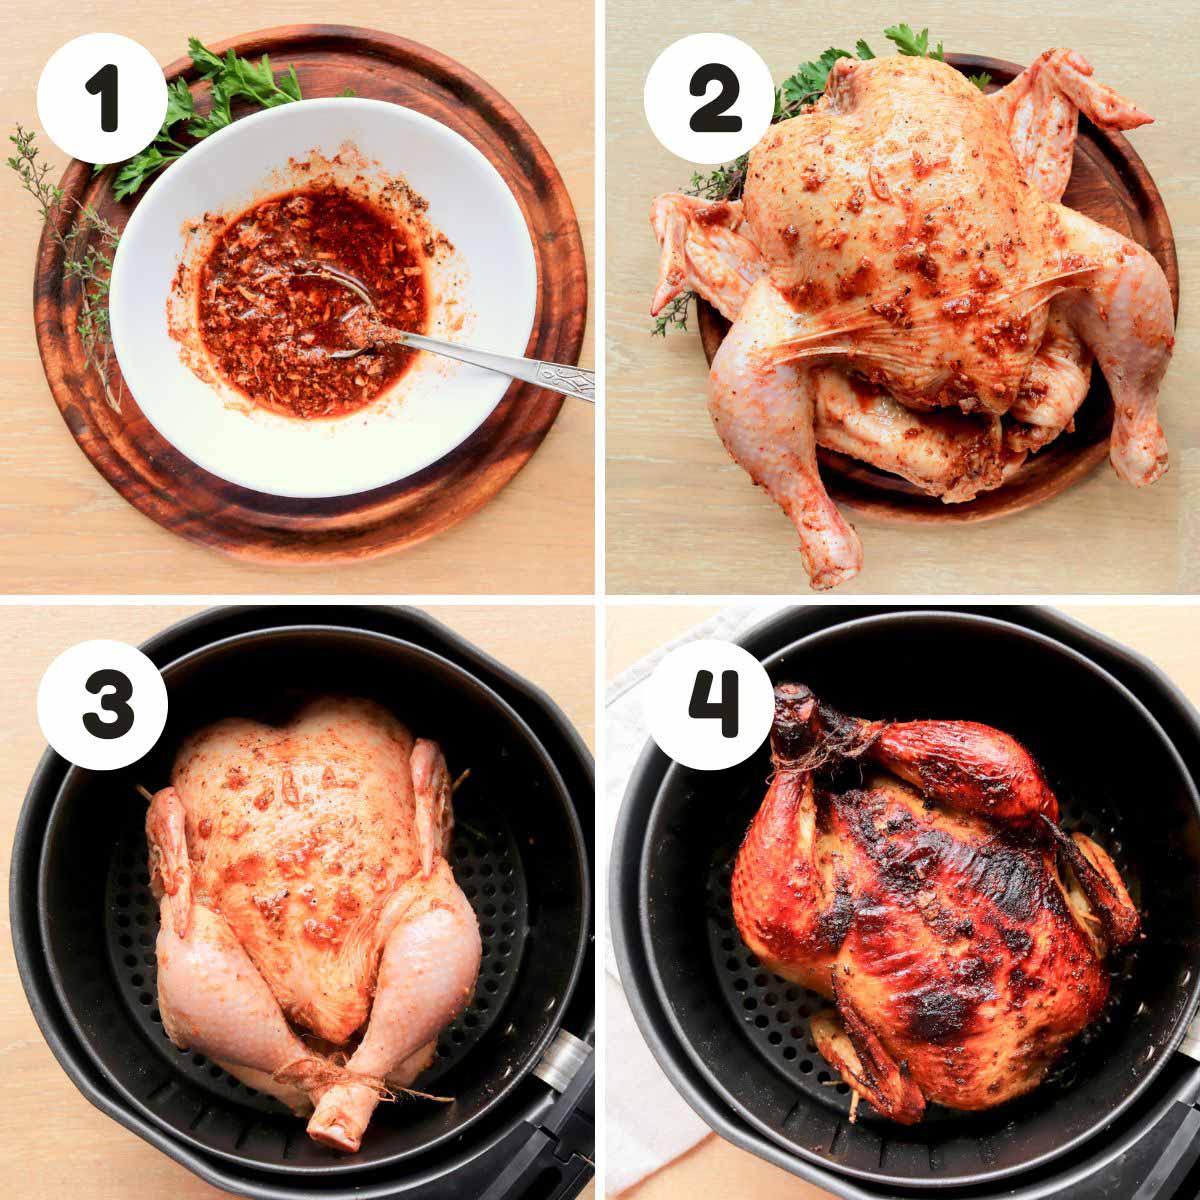 Steps to make the whole chicken.